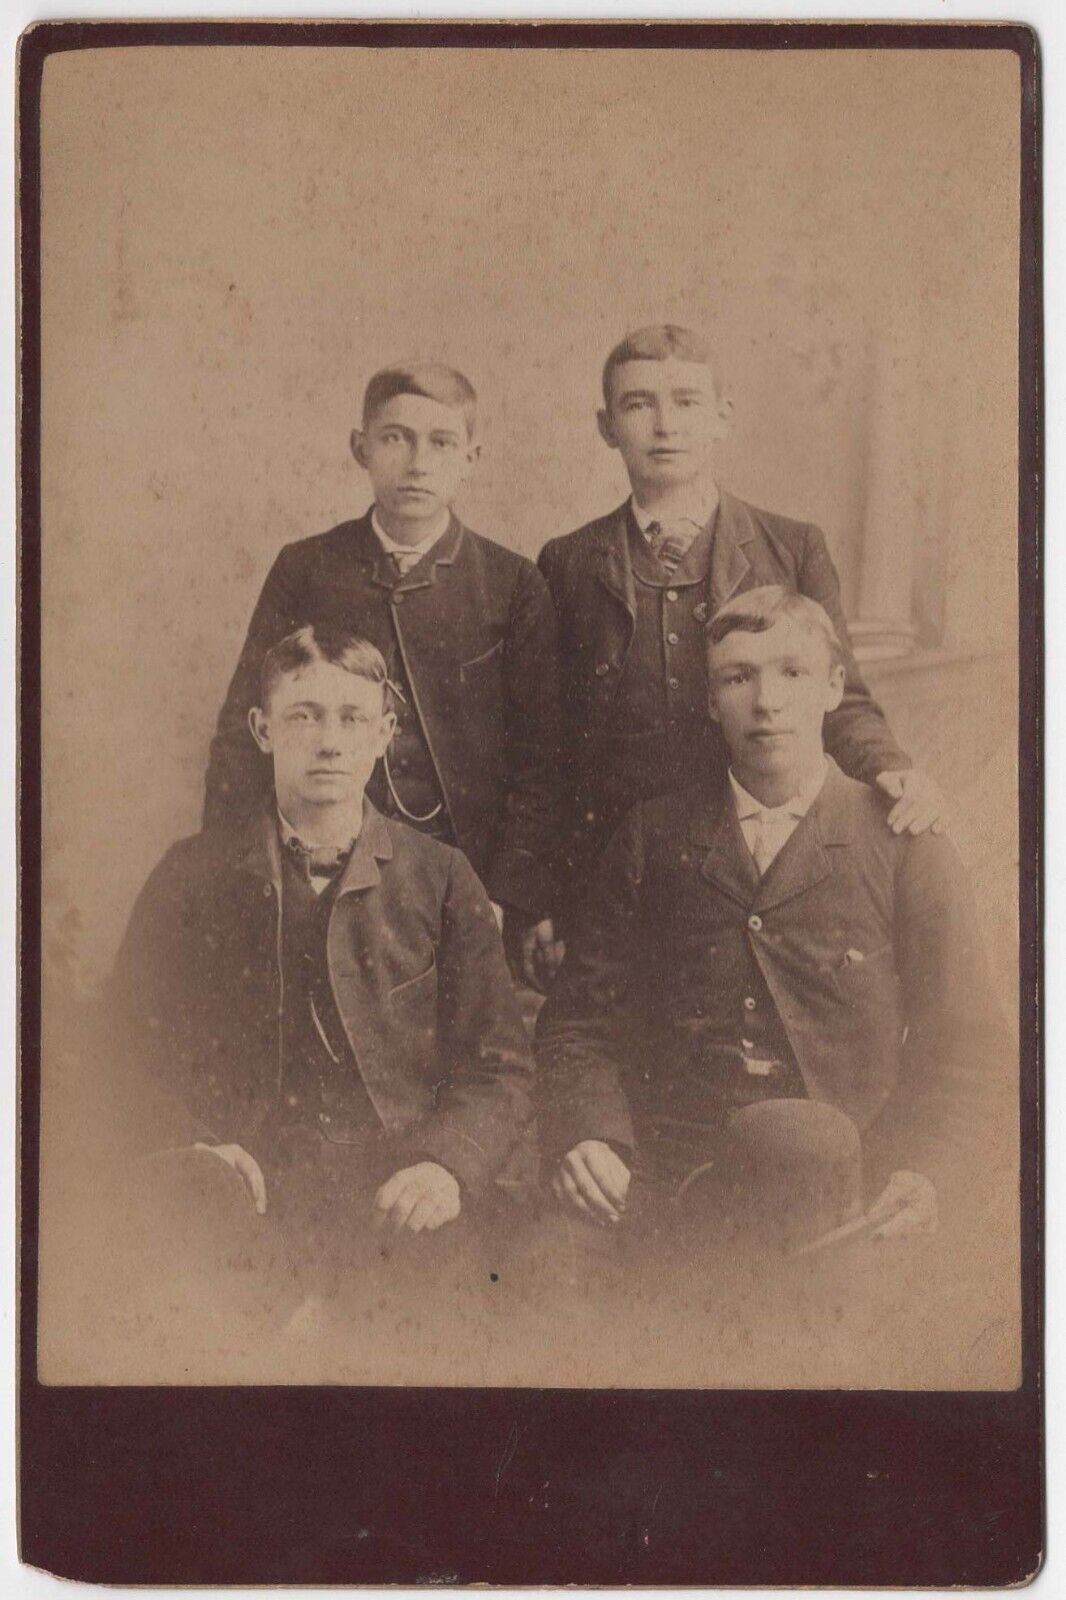 CIRCA 1880s CABINET CARD FOUR YOUNG BROTHERS IN SUITS UNMARKED